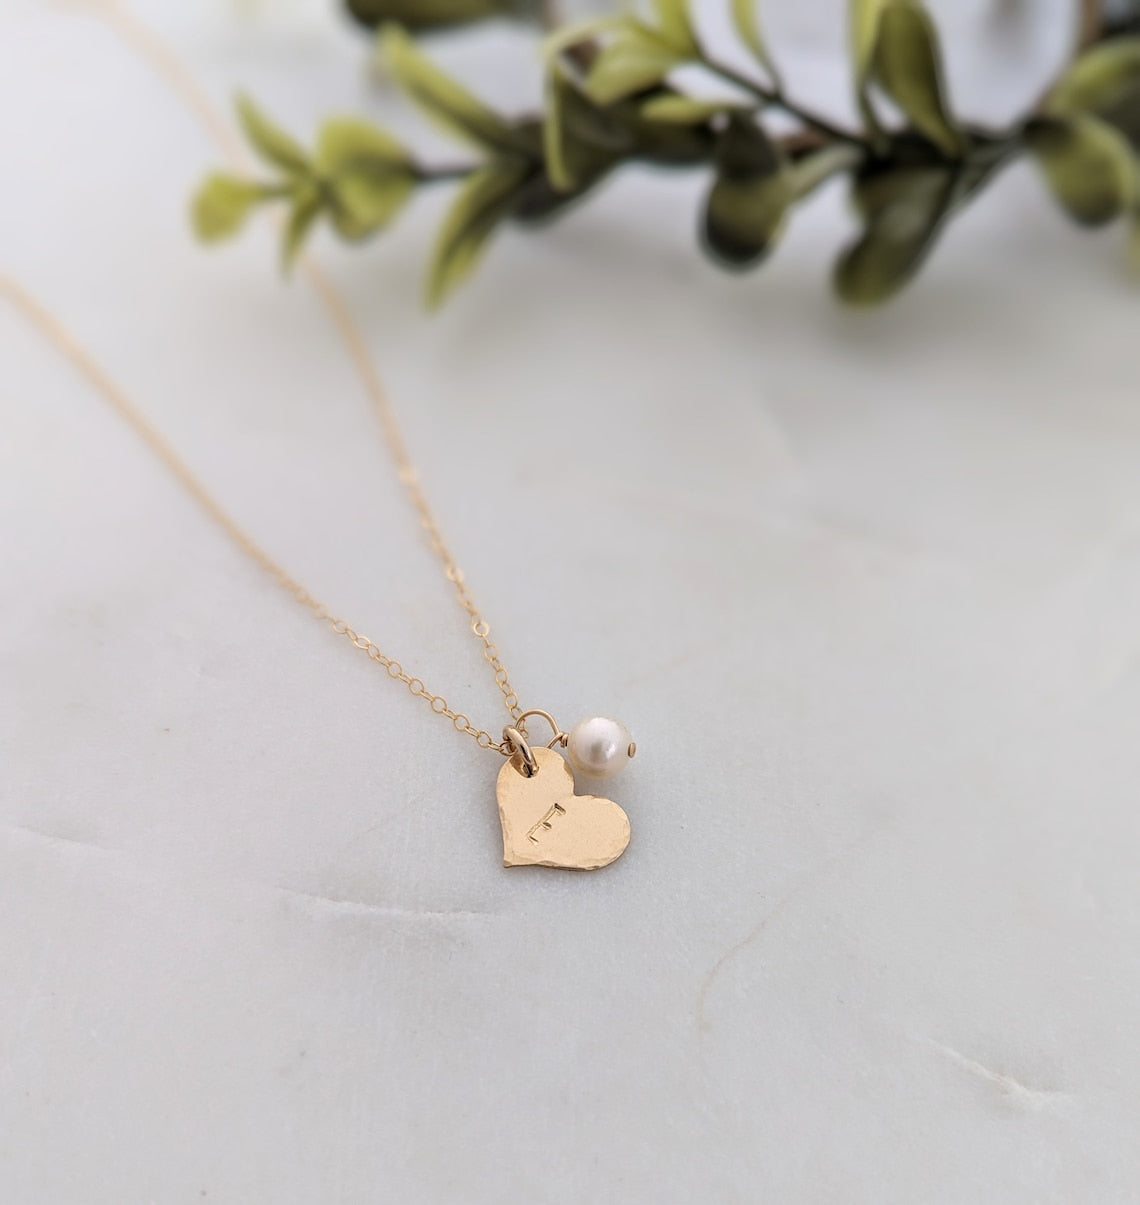 Personalized Heart Necklace with Pearl